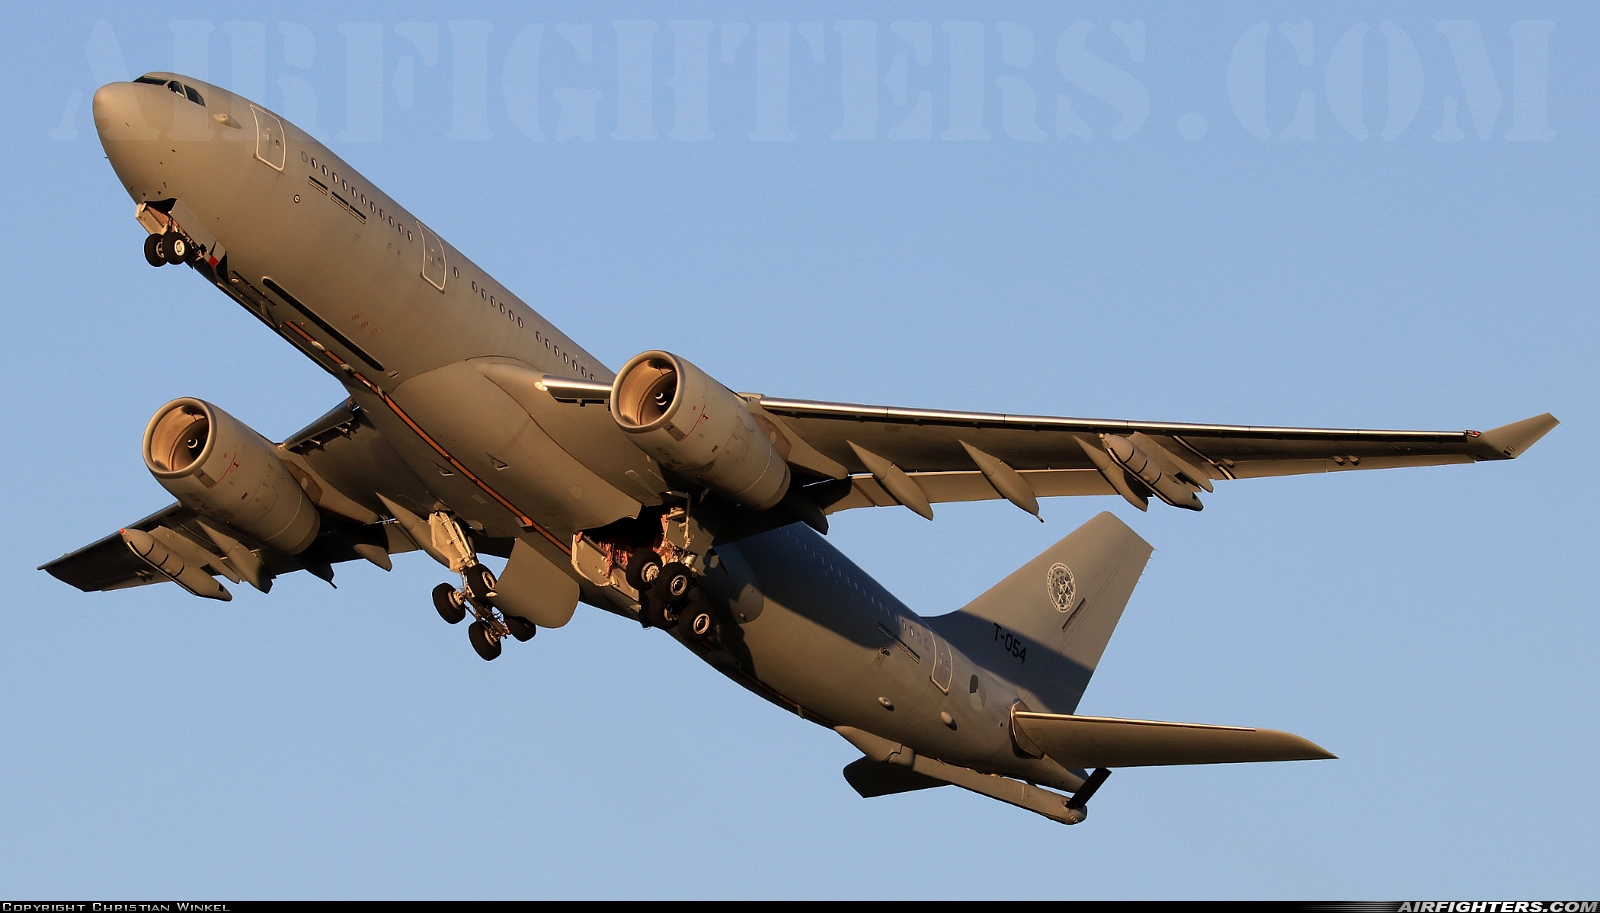 Netherlands - Air Force Airbus KC-30M (A330-243MRTT) T-054 at Wunstorf (ETNW), Germany